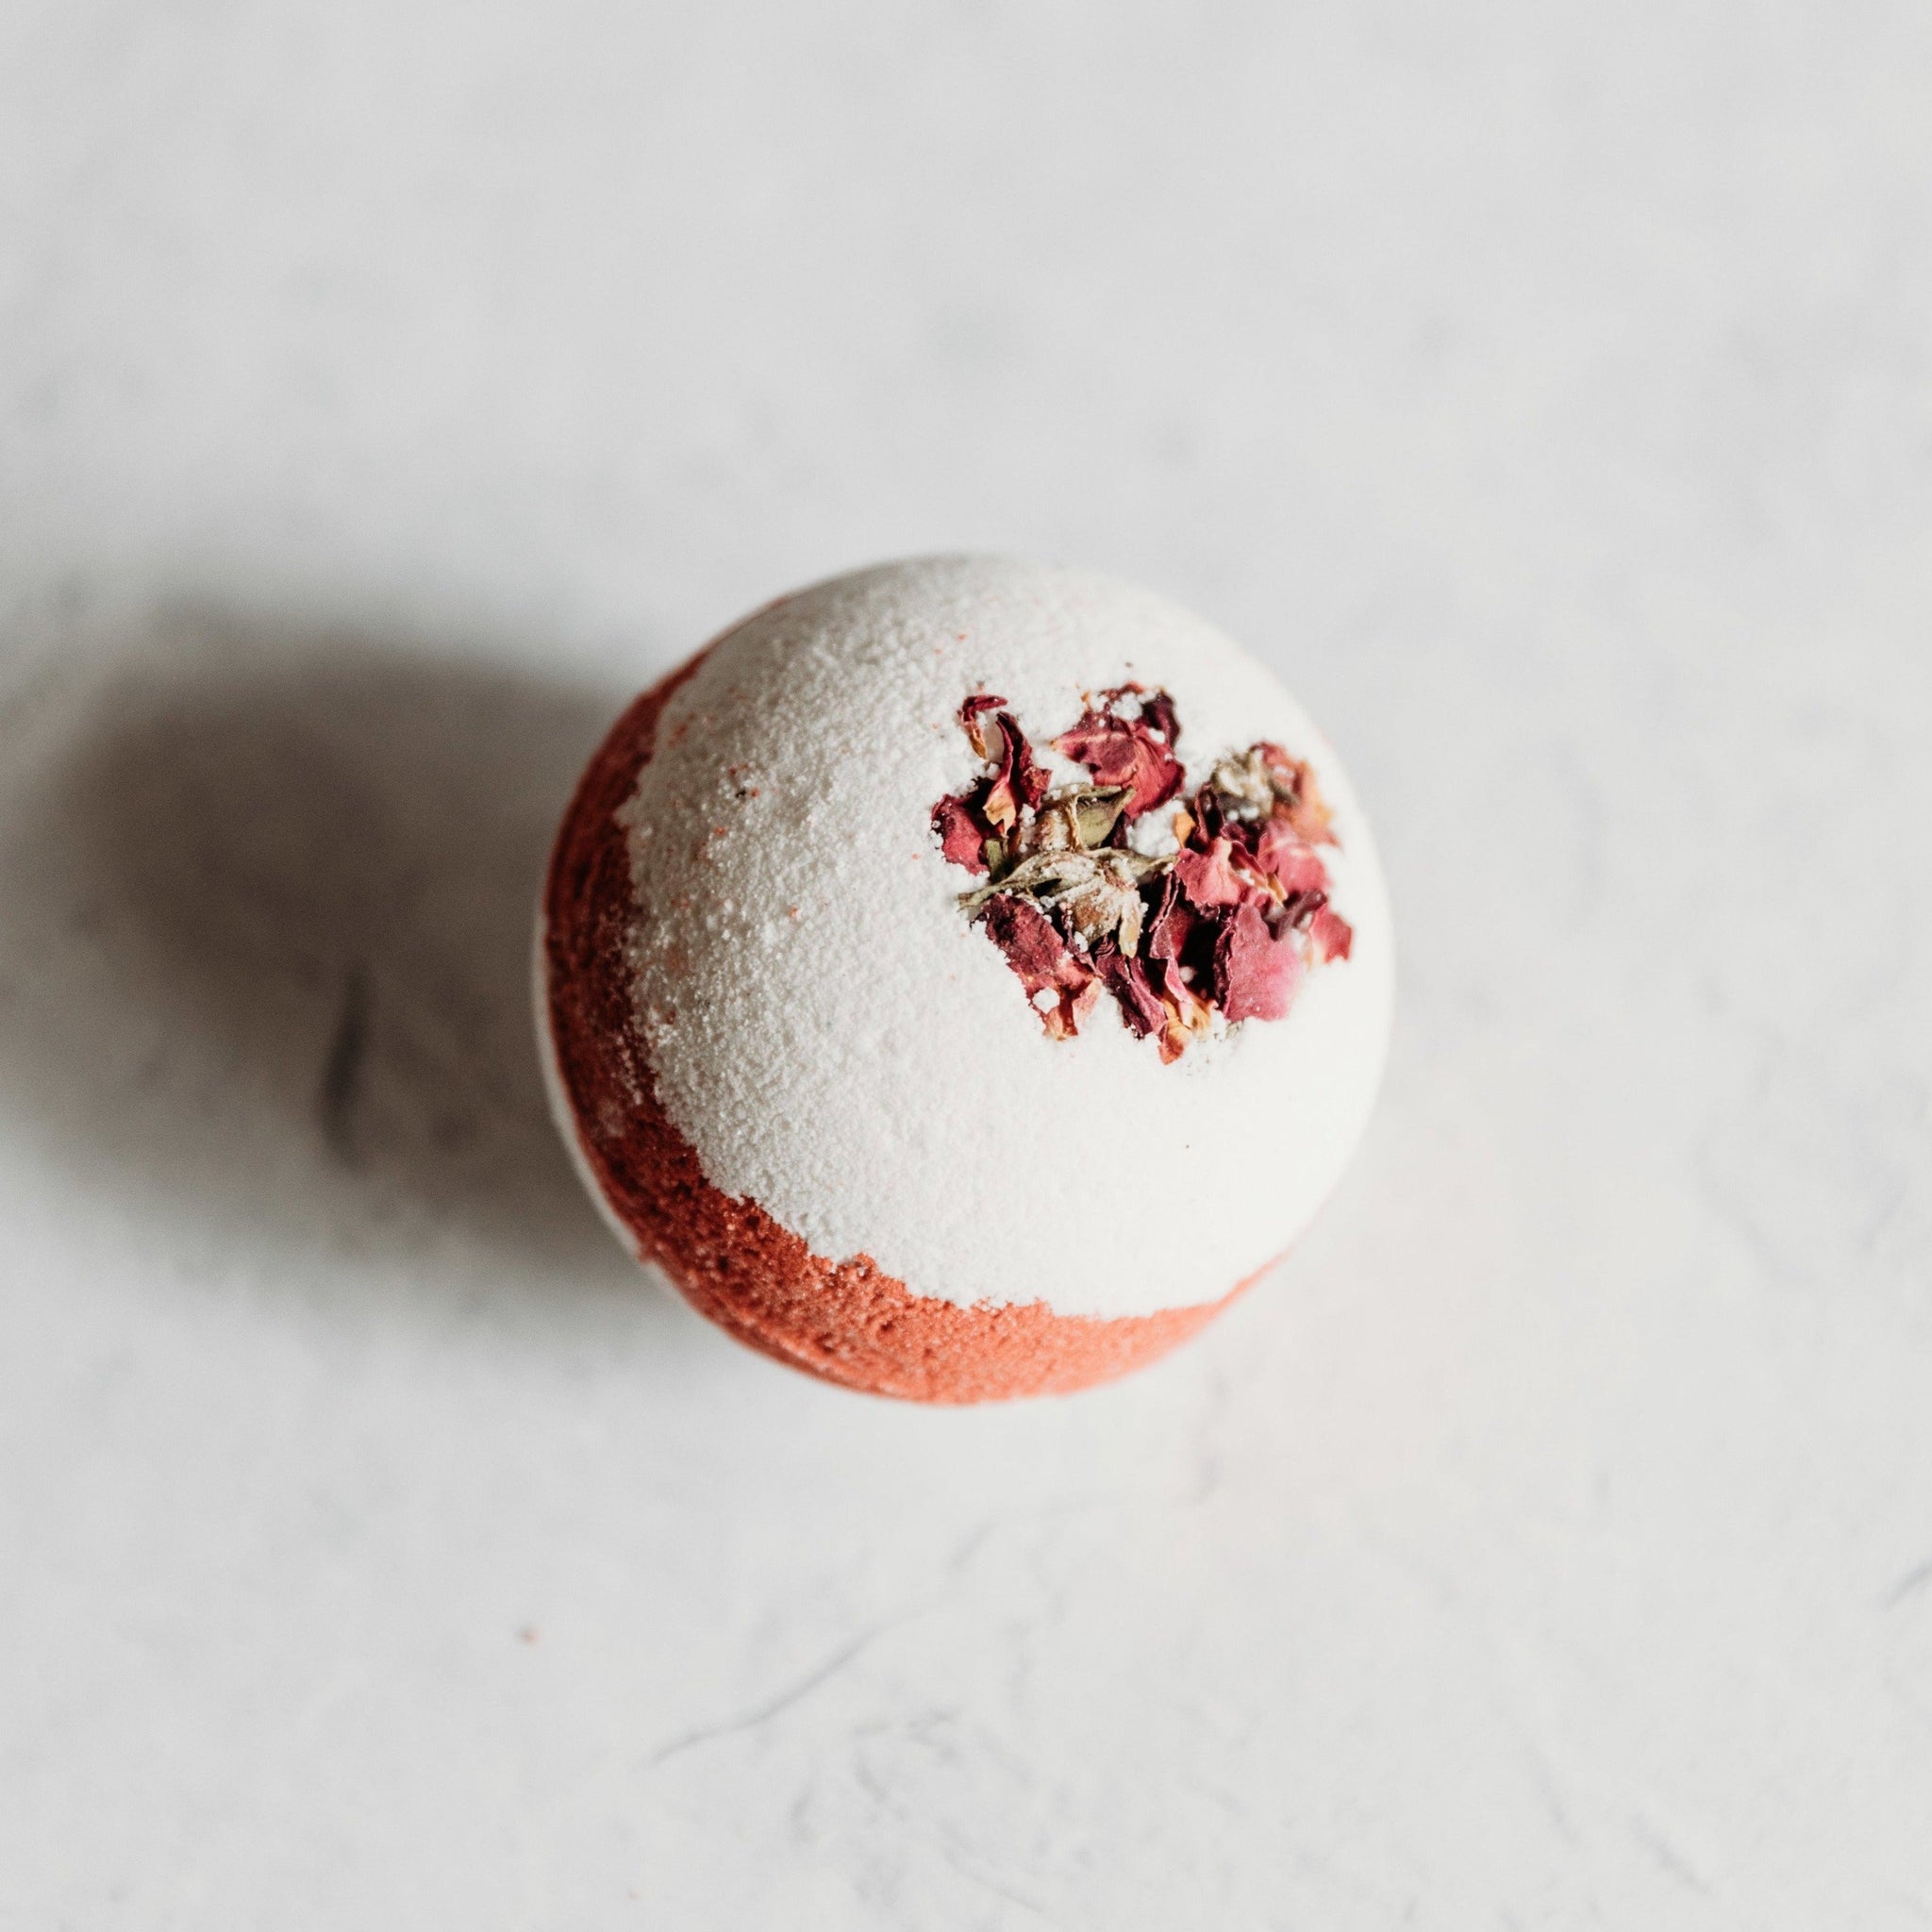 Enchanted Rose: This bath bomb is handmade with real Moroccan Rose petals, and contains natural antioxidants and oils to keep you skin feeling smooth.